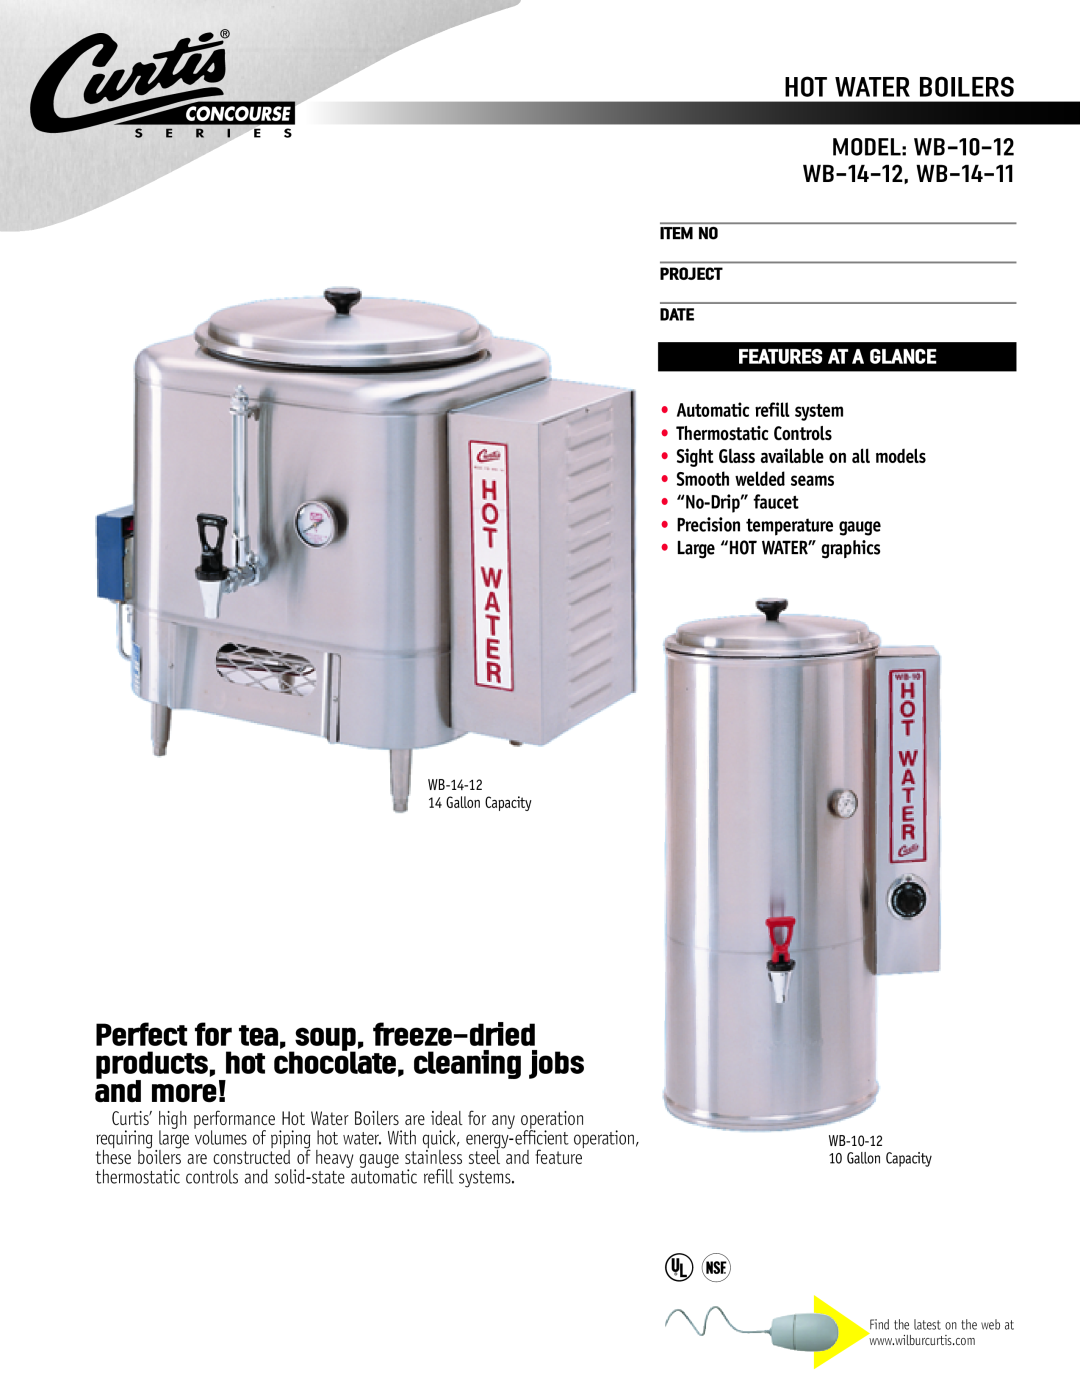 Curtis manual Hot Water Boilers, MODEL WB-10-12 WB-14-12, WB-14-11, Features At A Glance, Large “HOT WATER” graphics 